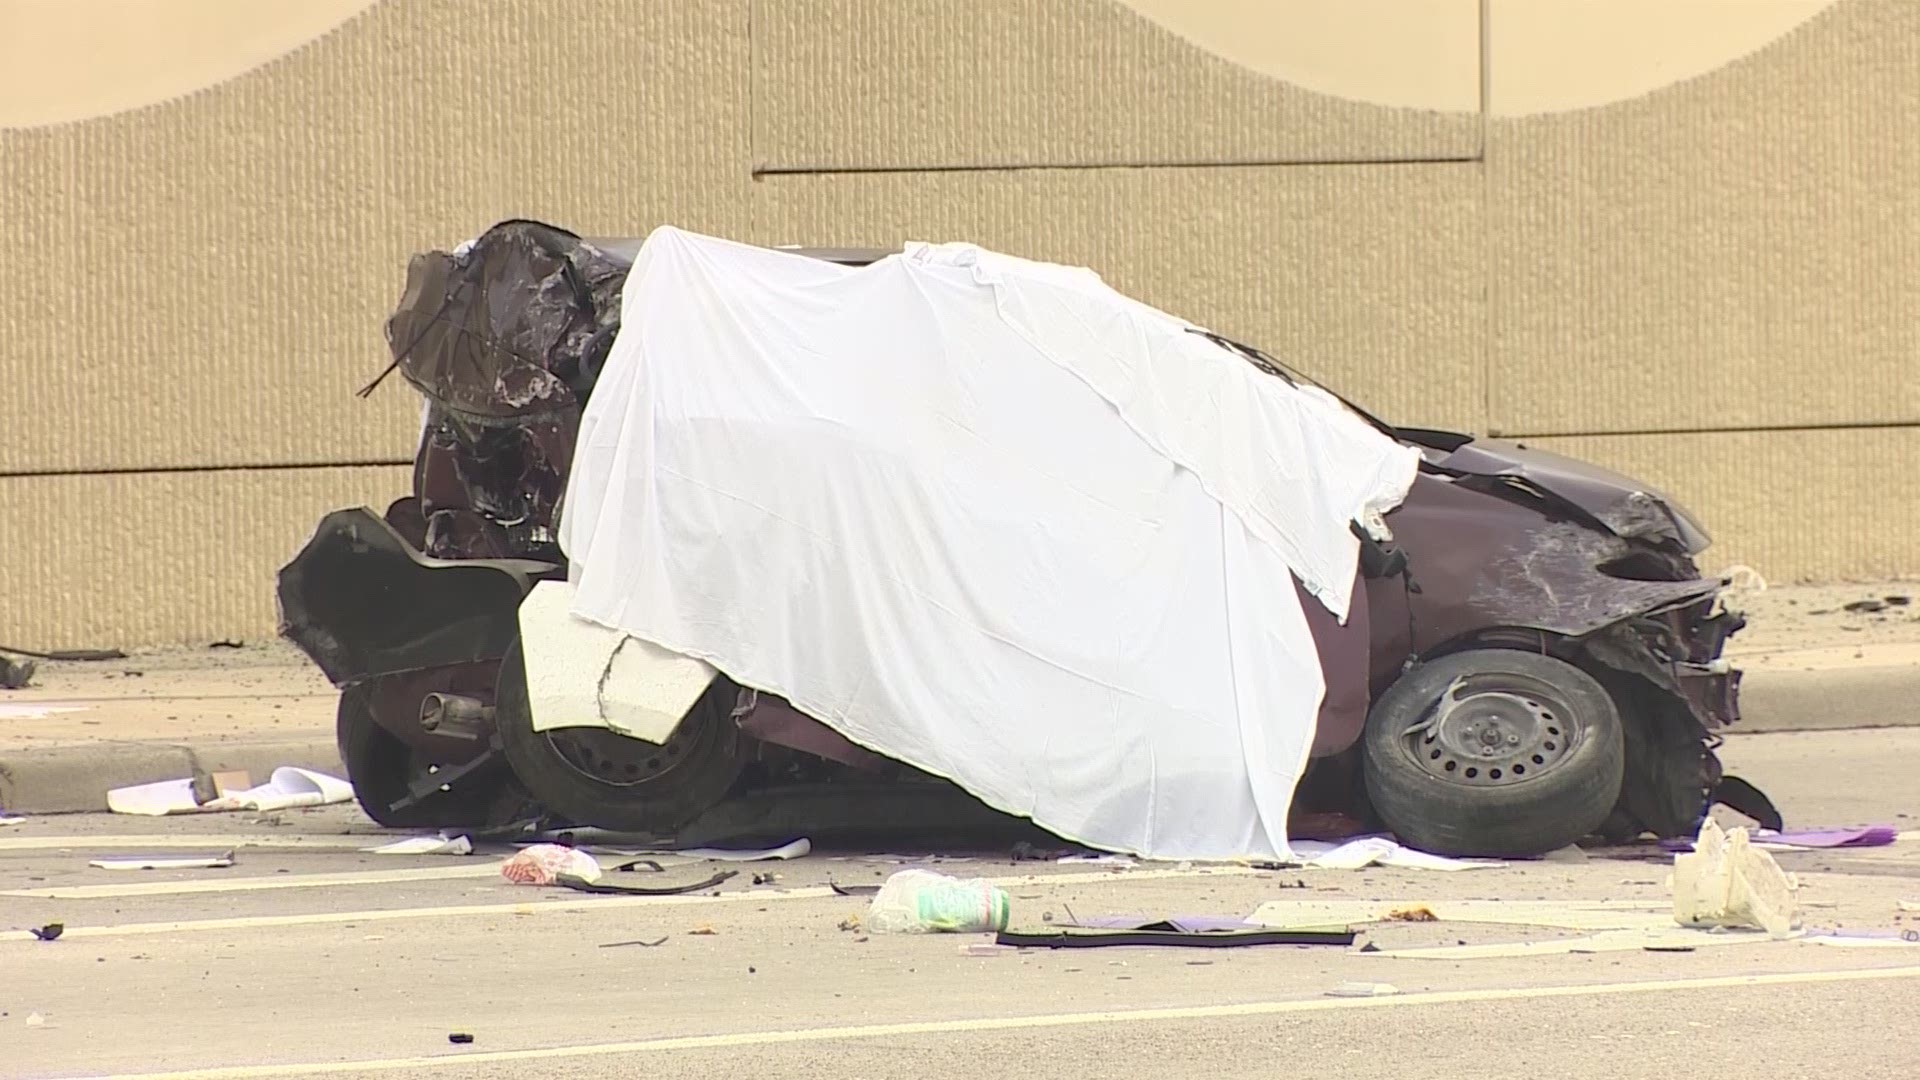 A woman and an infant child were killed in a two-vehicle collision involving a suspected drunk driver along the Gulf Freeway in southeast Houston Wednesday morning.